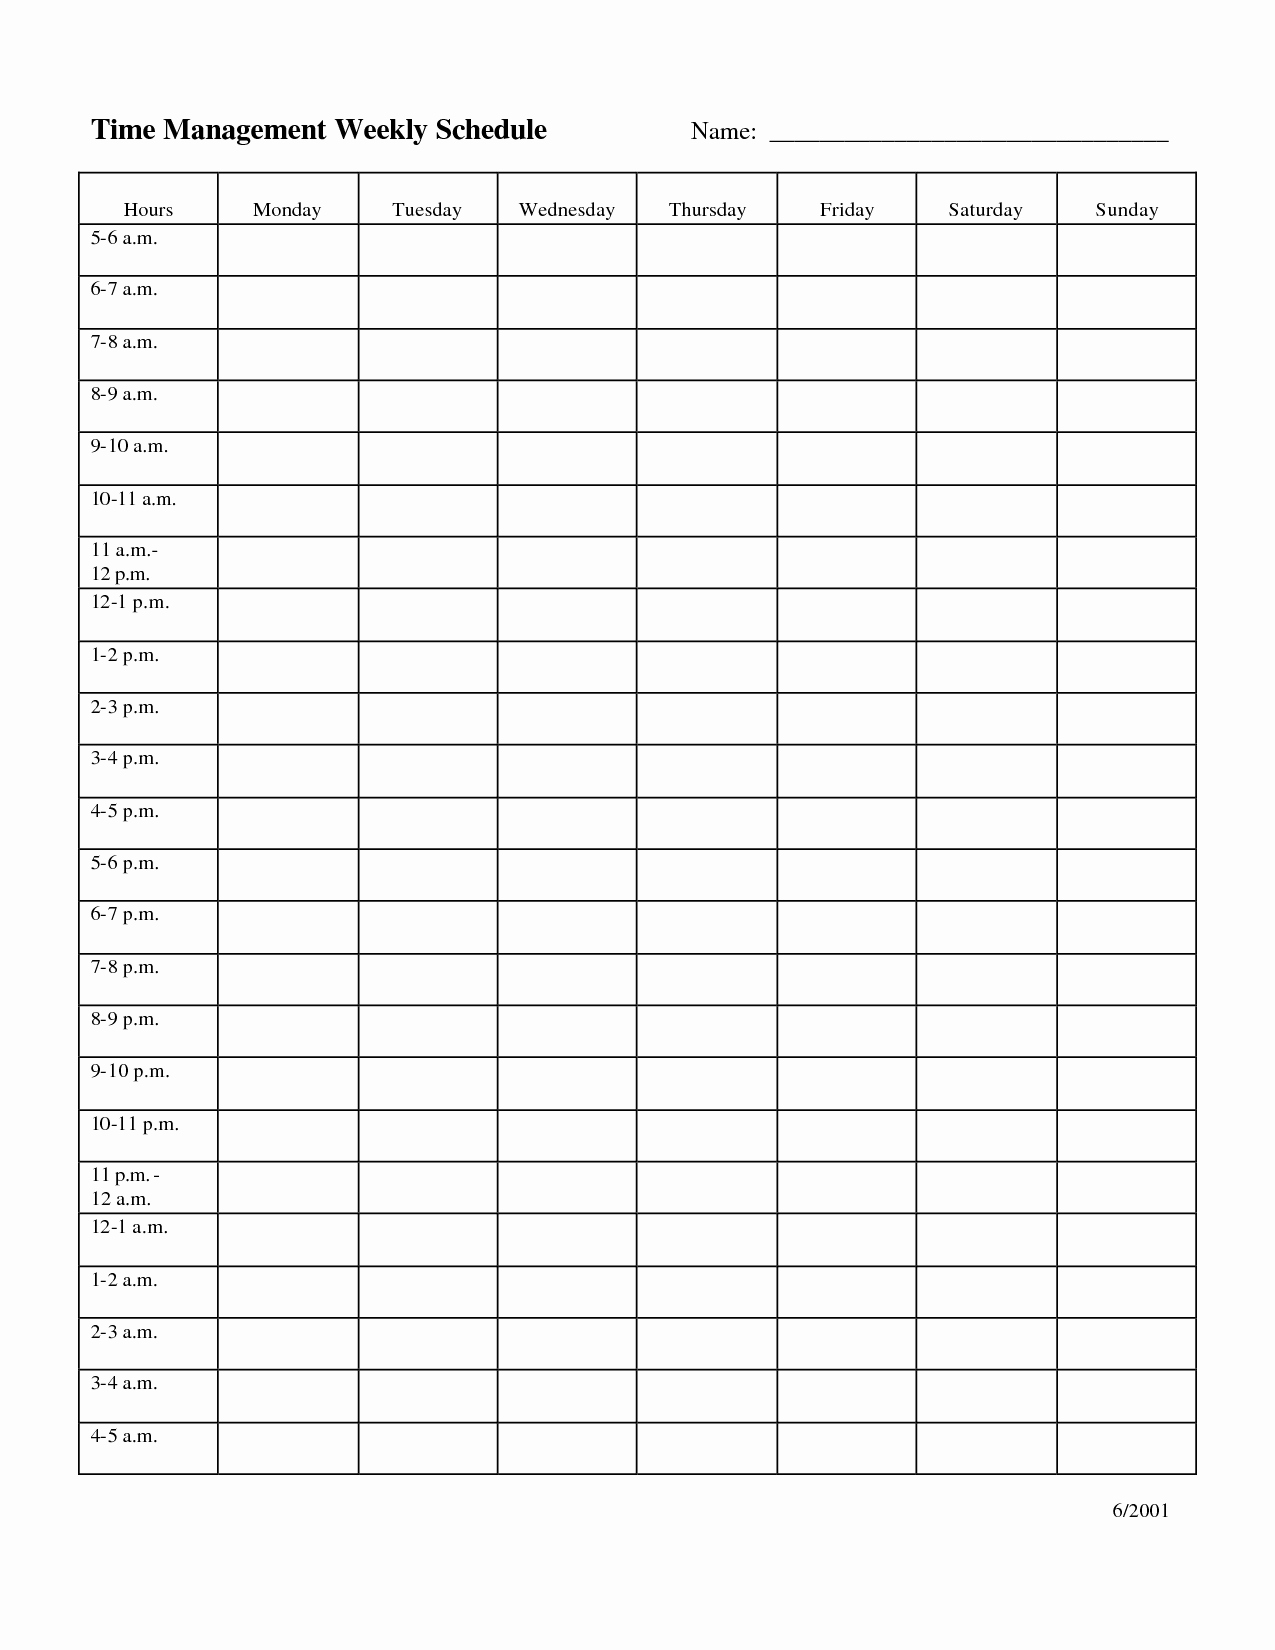 Weekly Time Schedule Template Excel Best Of Time Management Schedule Template